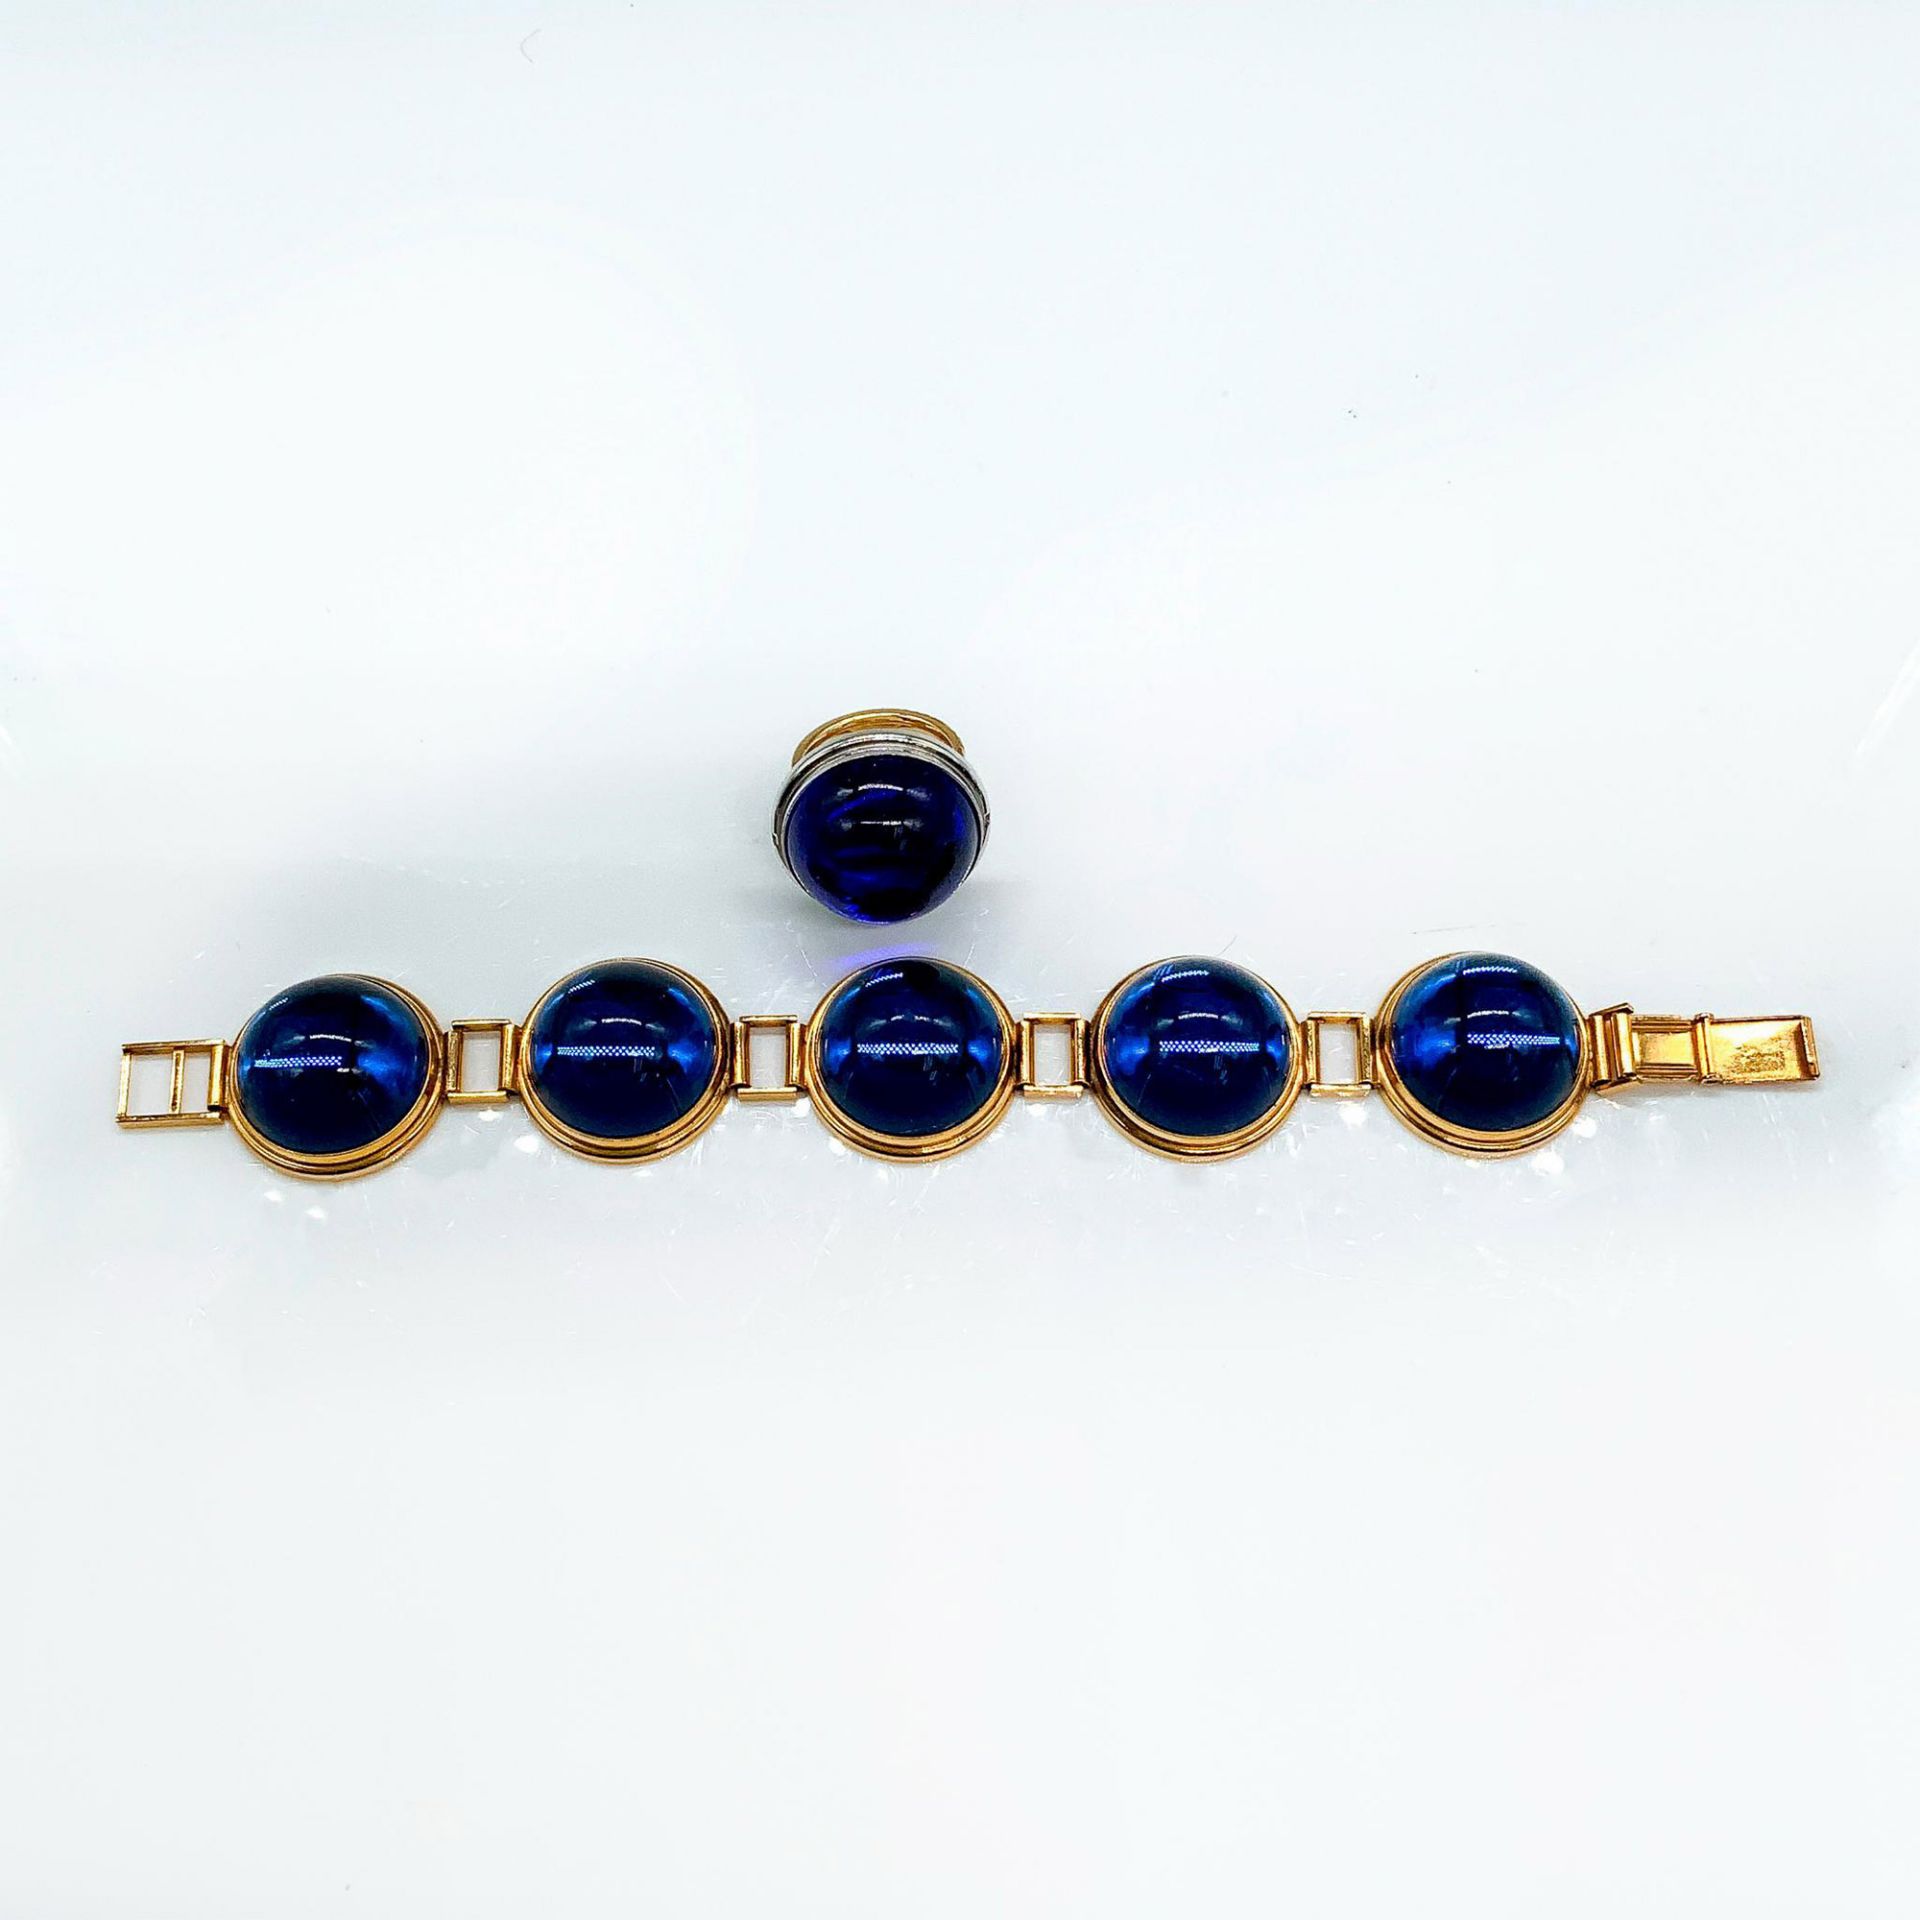 2pc Lalique Blue Cabochon Bracelet and 14K Gold Ring - Image 2 of 3